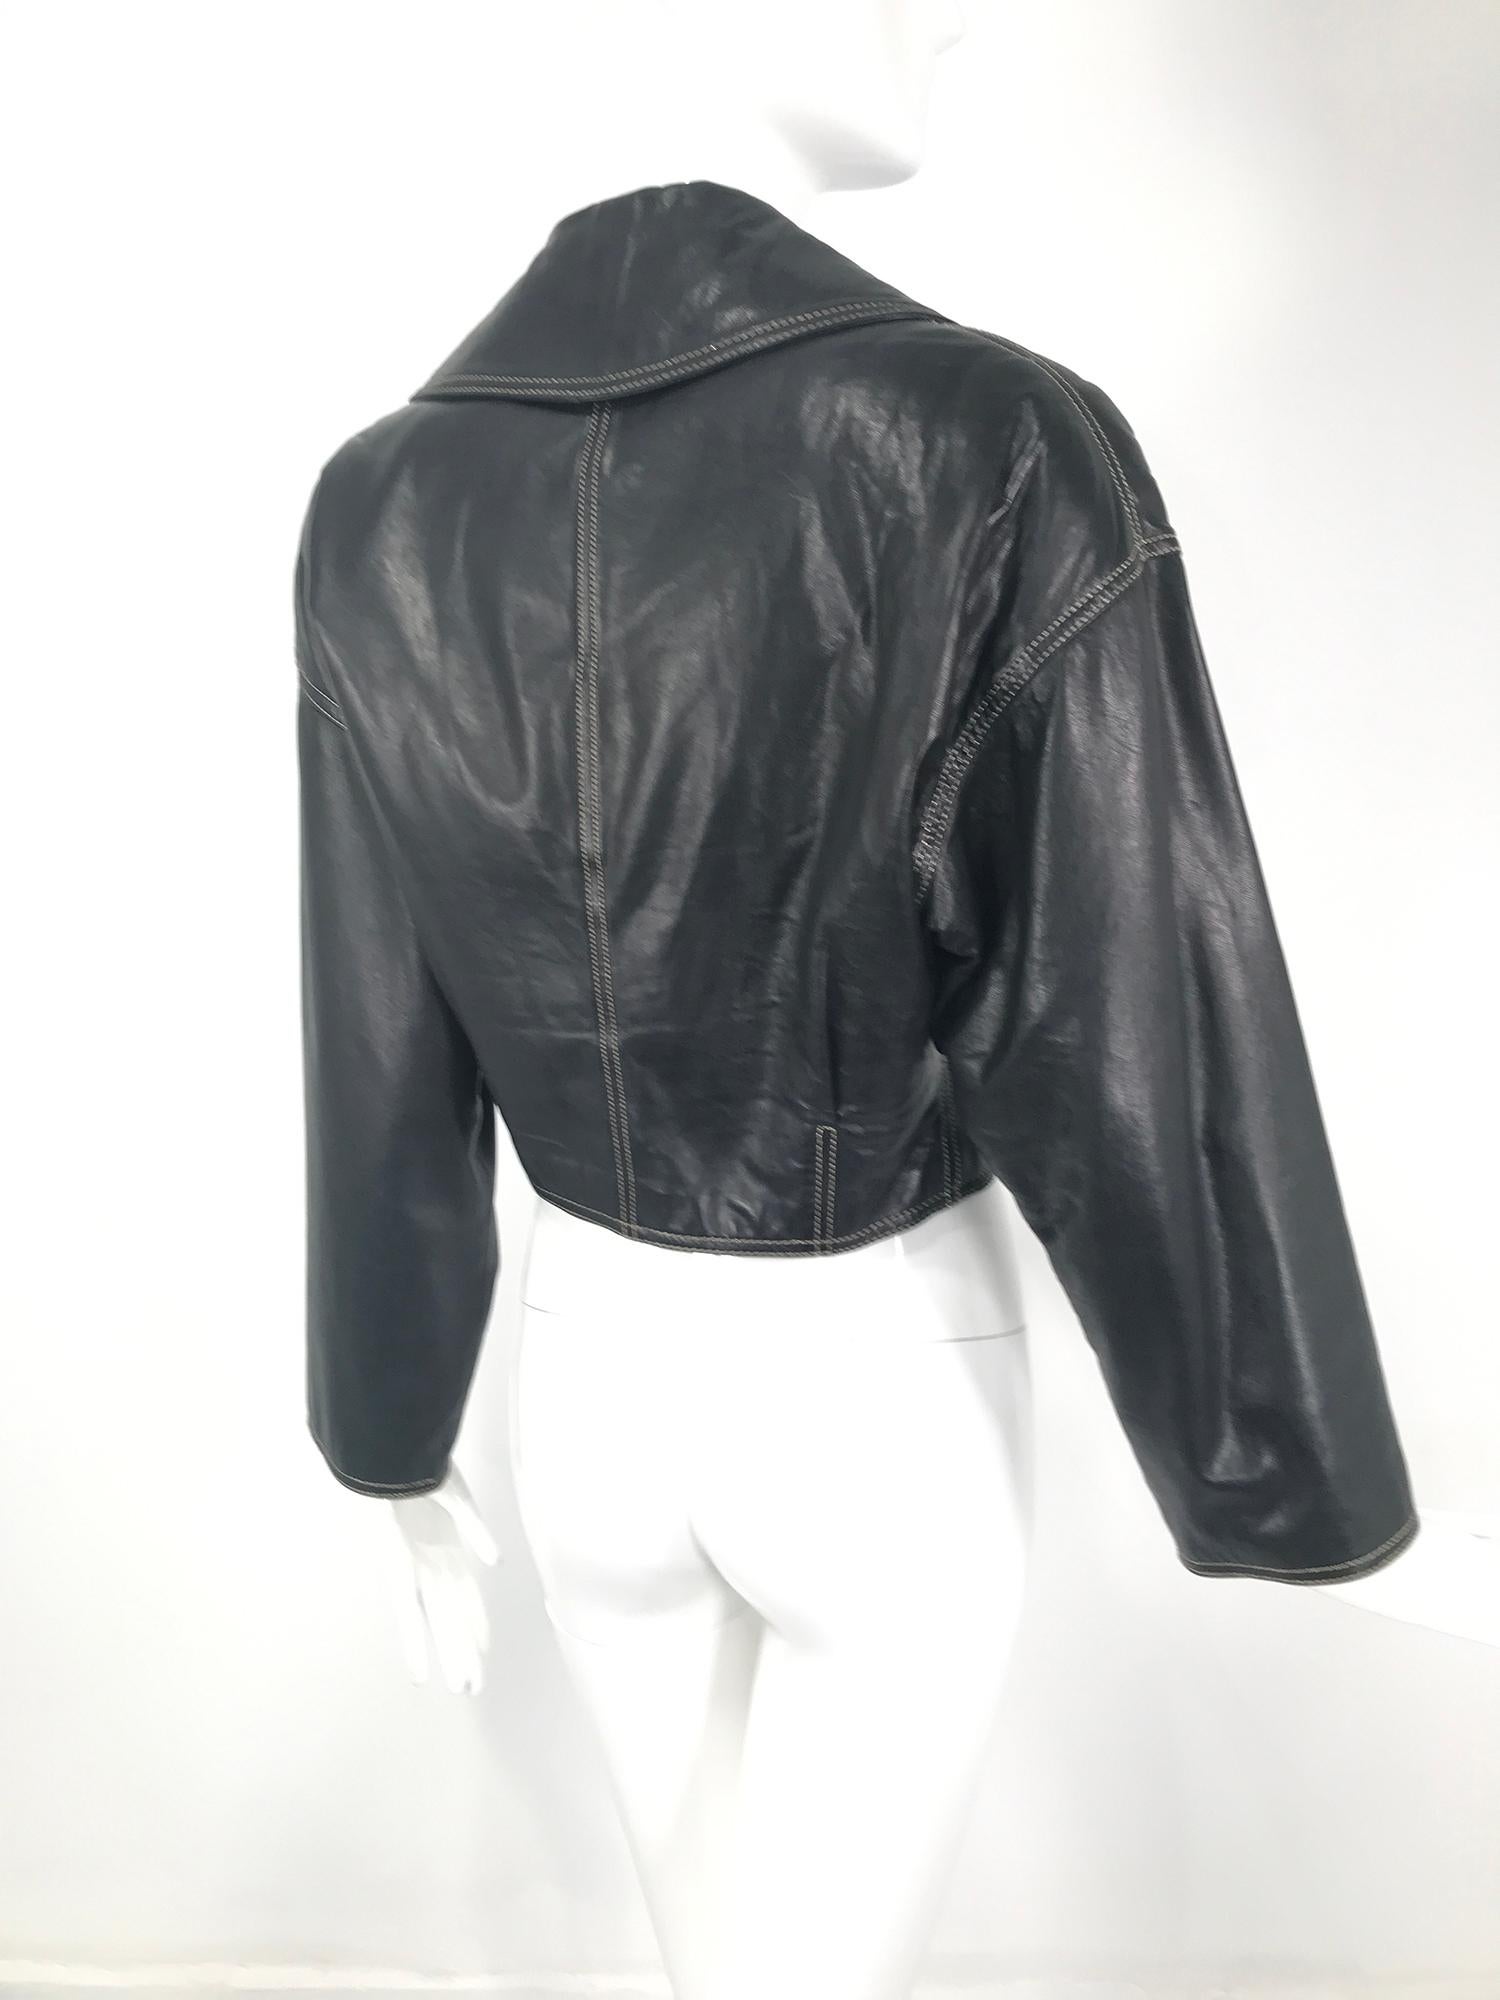 Genny Black Leather Bomber Jacket With Rhinestone Buttons & Gold Stitching 1980s For Sale 1